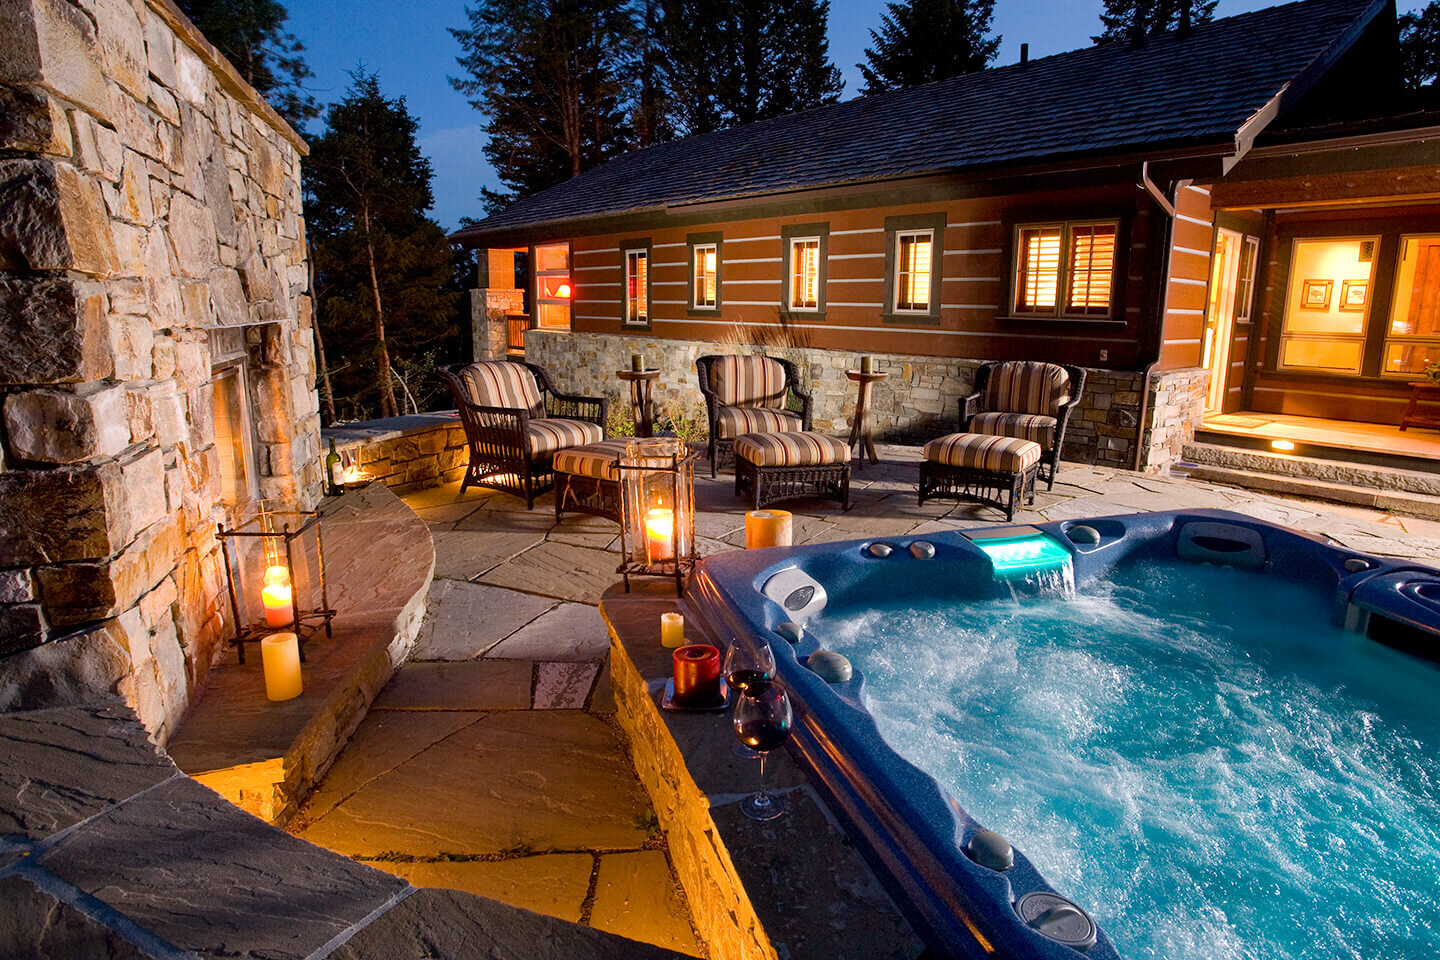 Outdoor blue water jacuzzi by stone wall at night